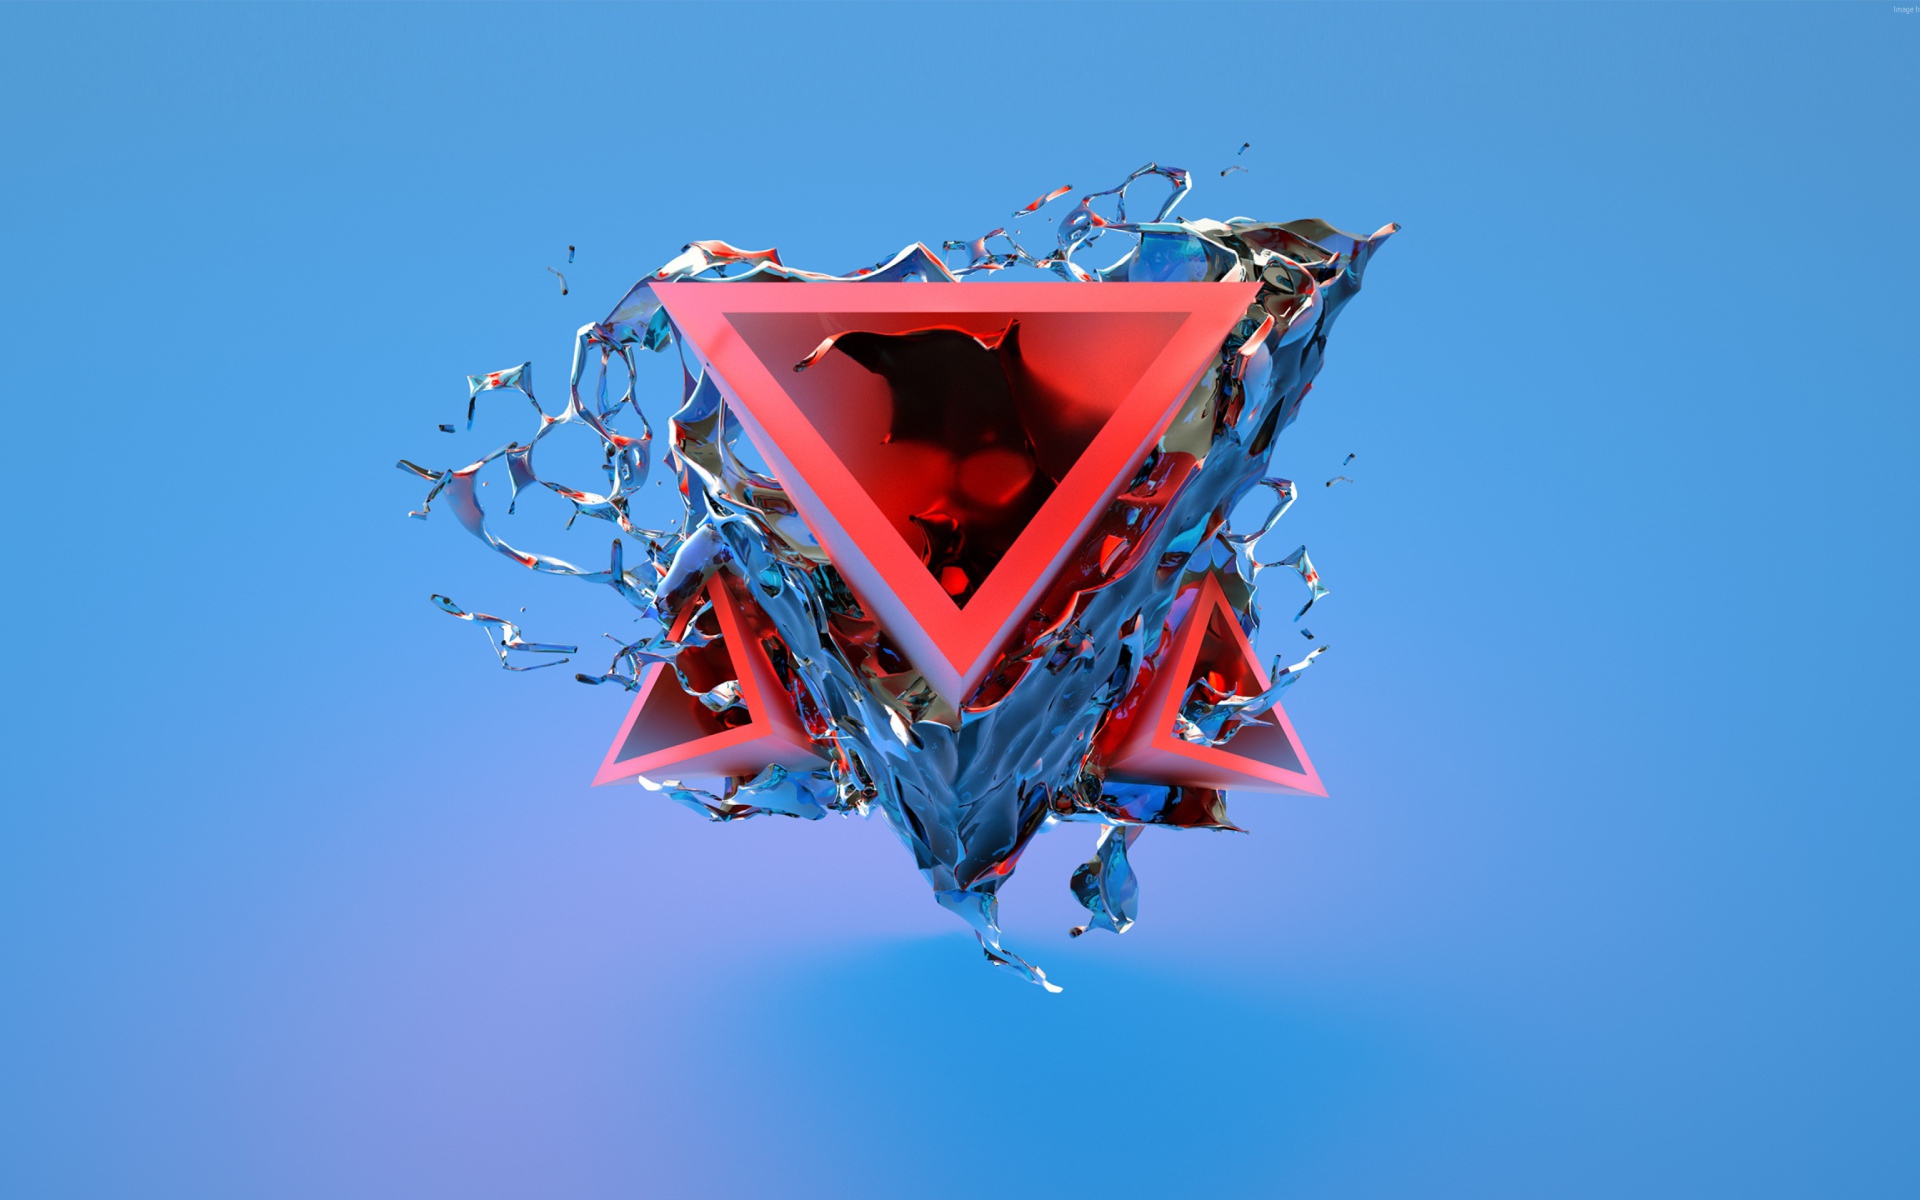 The triangle is destroyed in part on a blue background